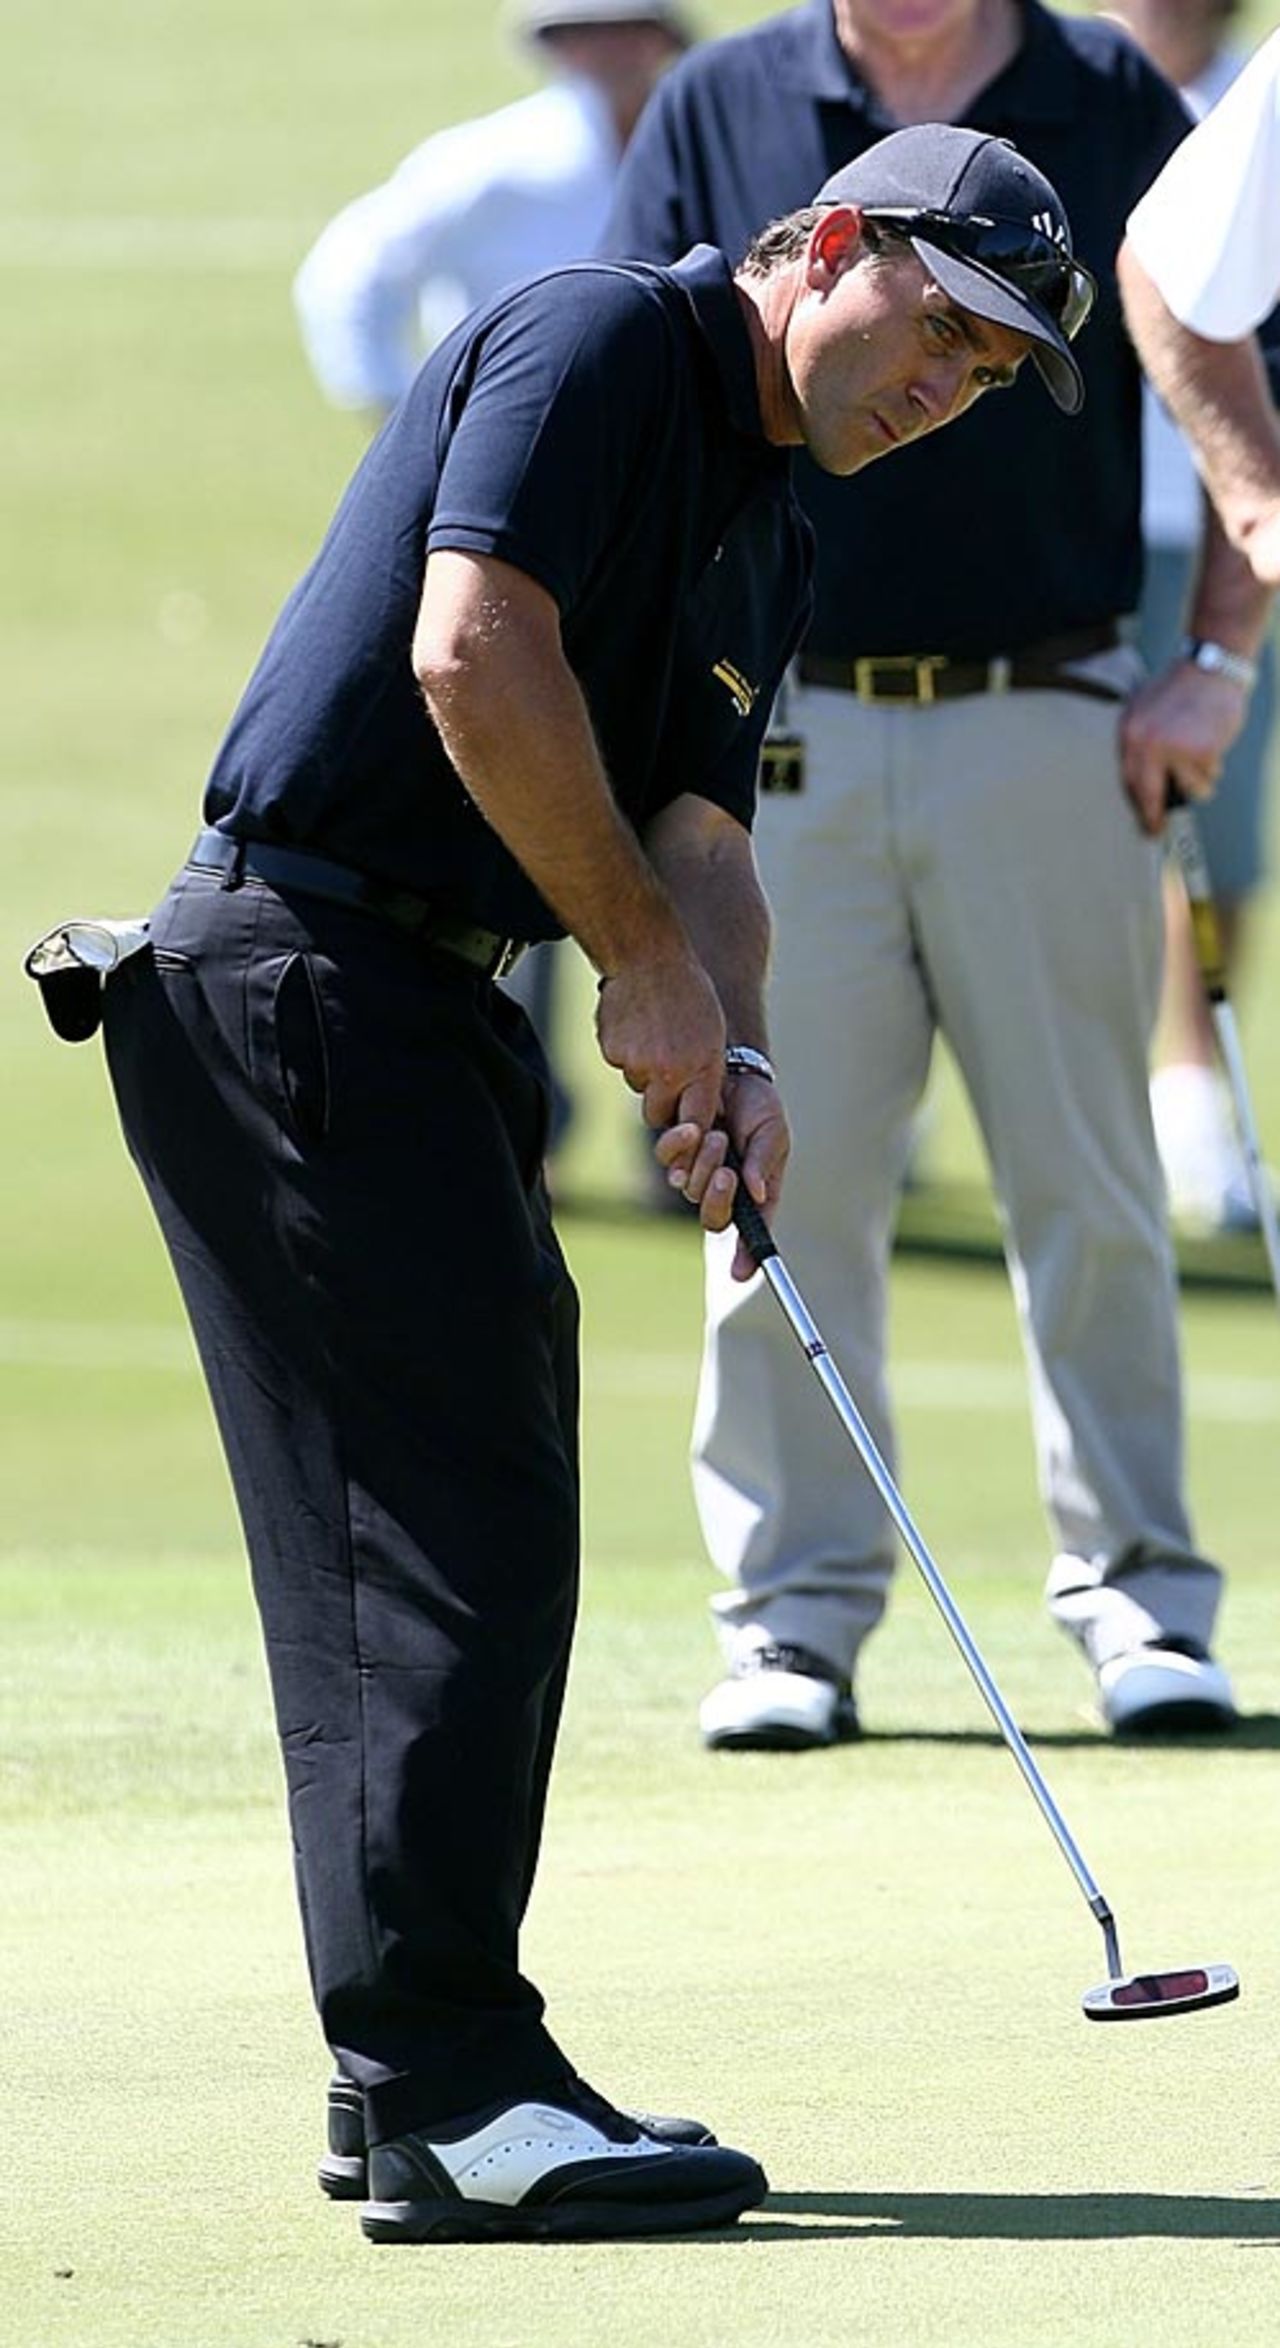 Justin Langer makes a putt at a charity golf event, Perth, February 17, 2009